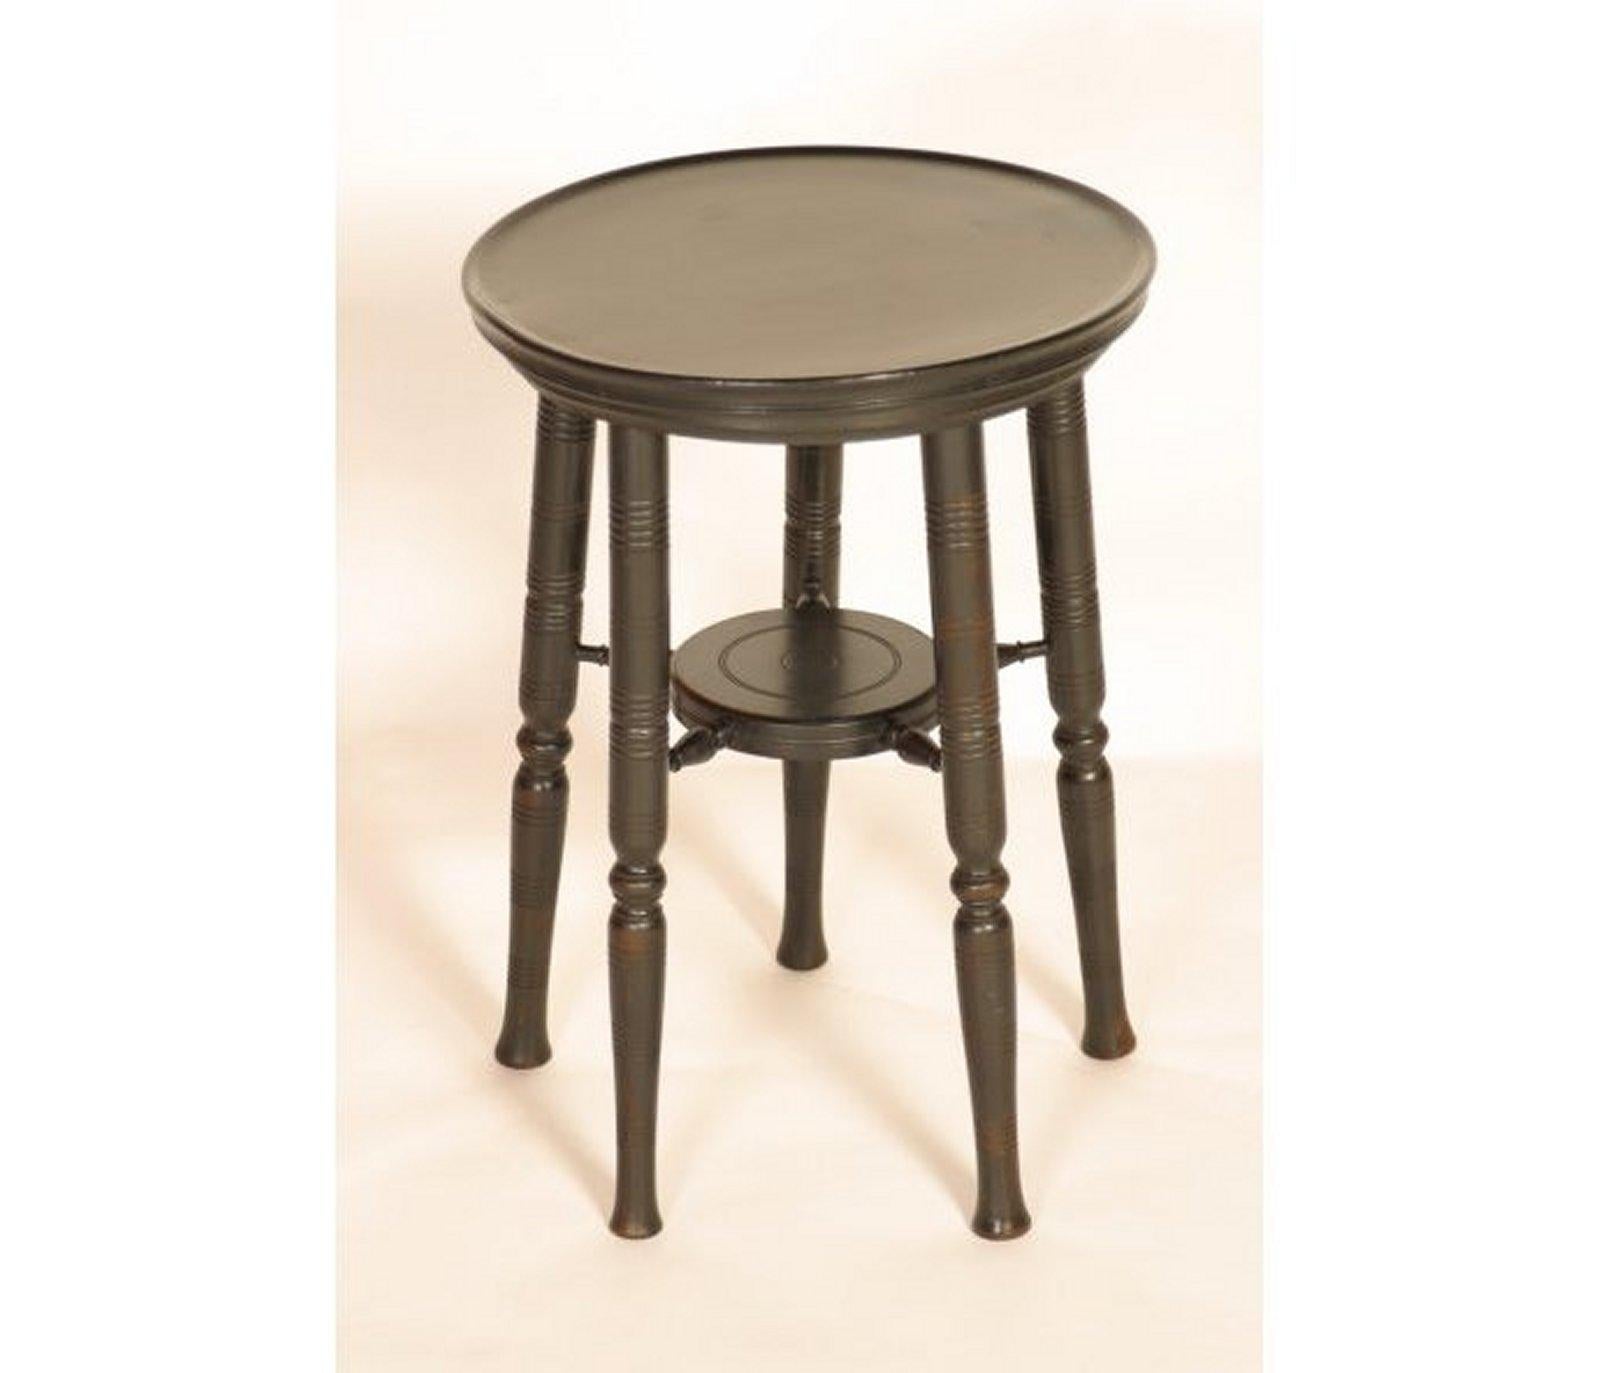 Edward William Godwin (attributed), an aesthetic movement circular wine table, the five turned legs united by a circular under tier.
The legs of this table are identical to those of the ebonized side tables that were made by William Watt. The use of